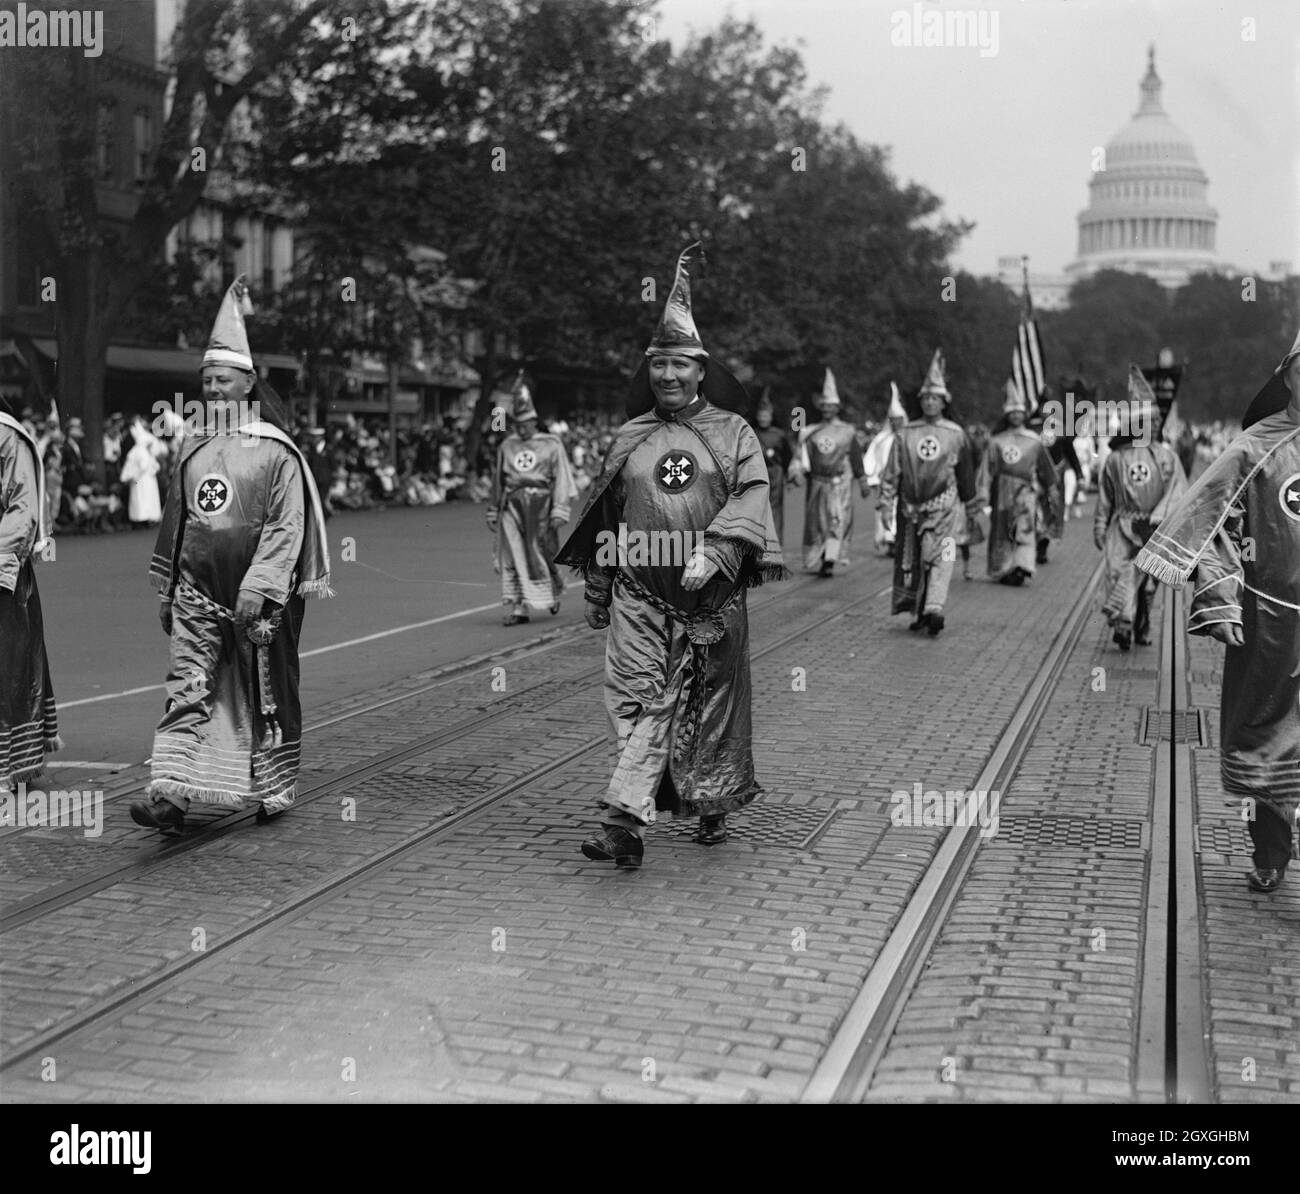 Vintage photo dated September 13th 1926 showing members of the Ku Klux Klan dressed in robes parading down Pennsylvania Avenue in Washington D.C. with the stars and stripes flag and Capitol dome in the background.  Leading the parade is Hiram Wesley Evans, Grand Wizard of the KKK.  Evans had led the kidnapping and torture of a black man while leader of the Dallas Klan Stock Photo